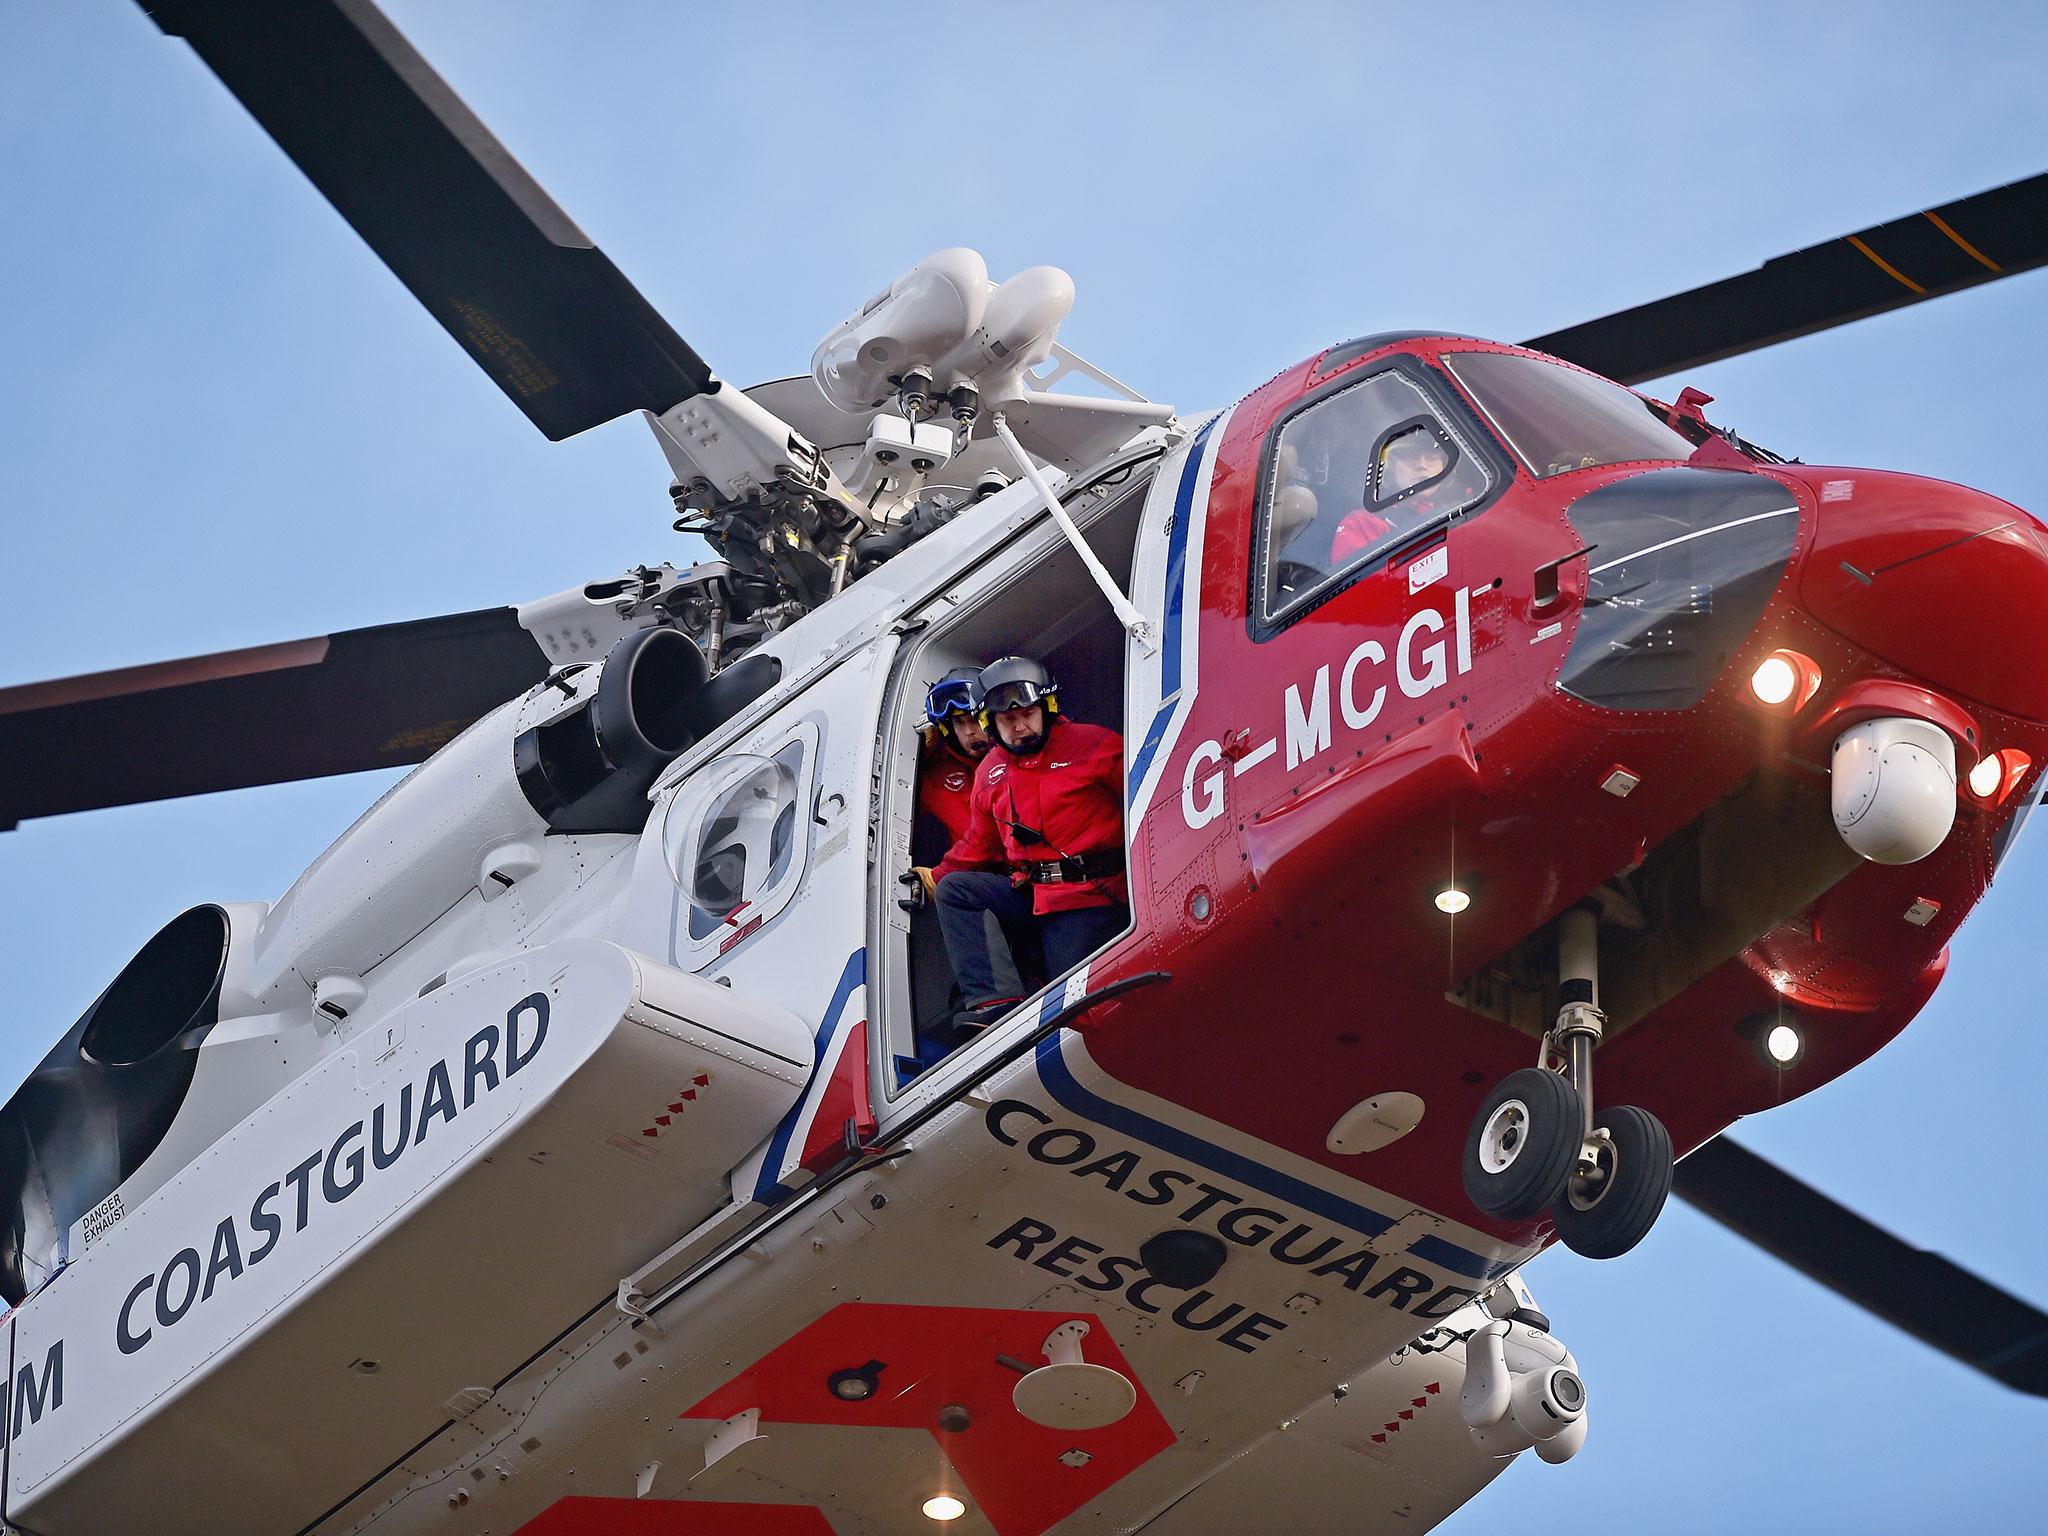 UK Coastguard helicopter in action